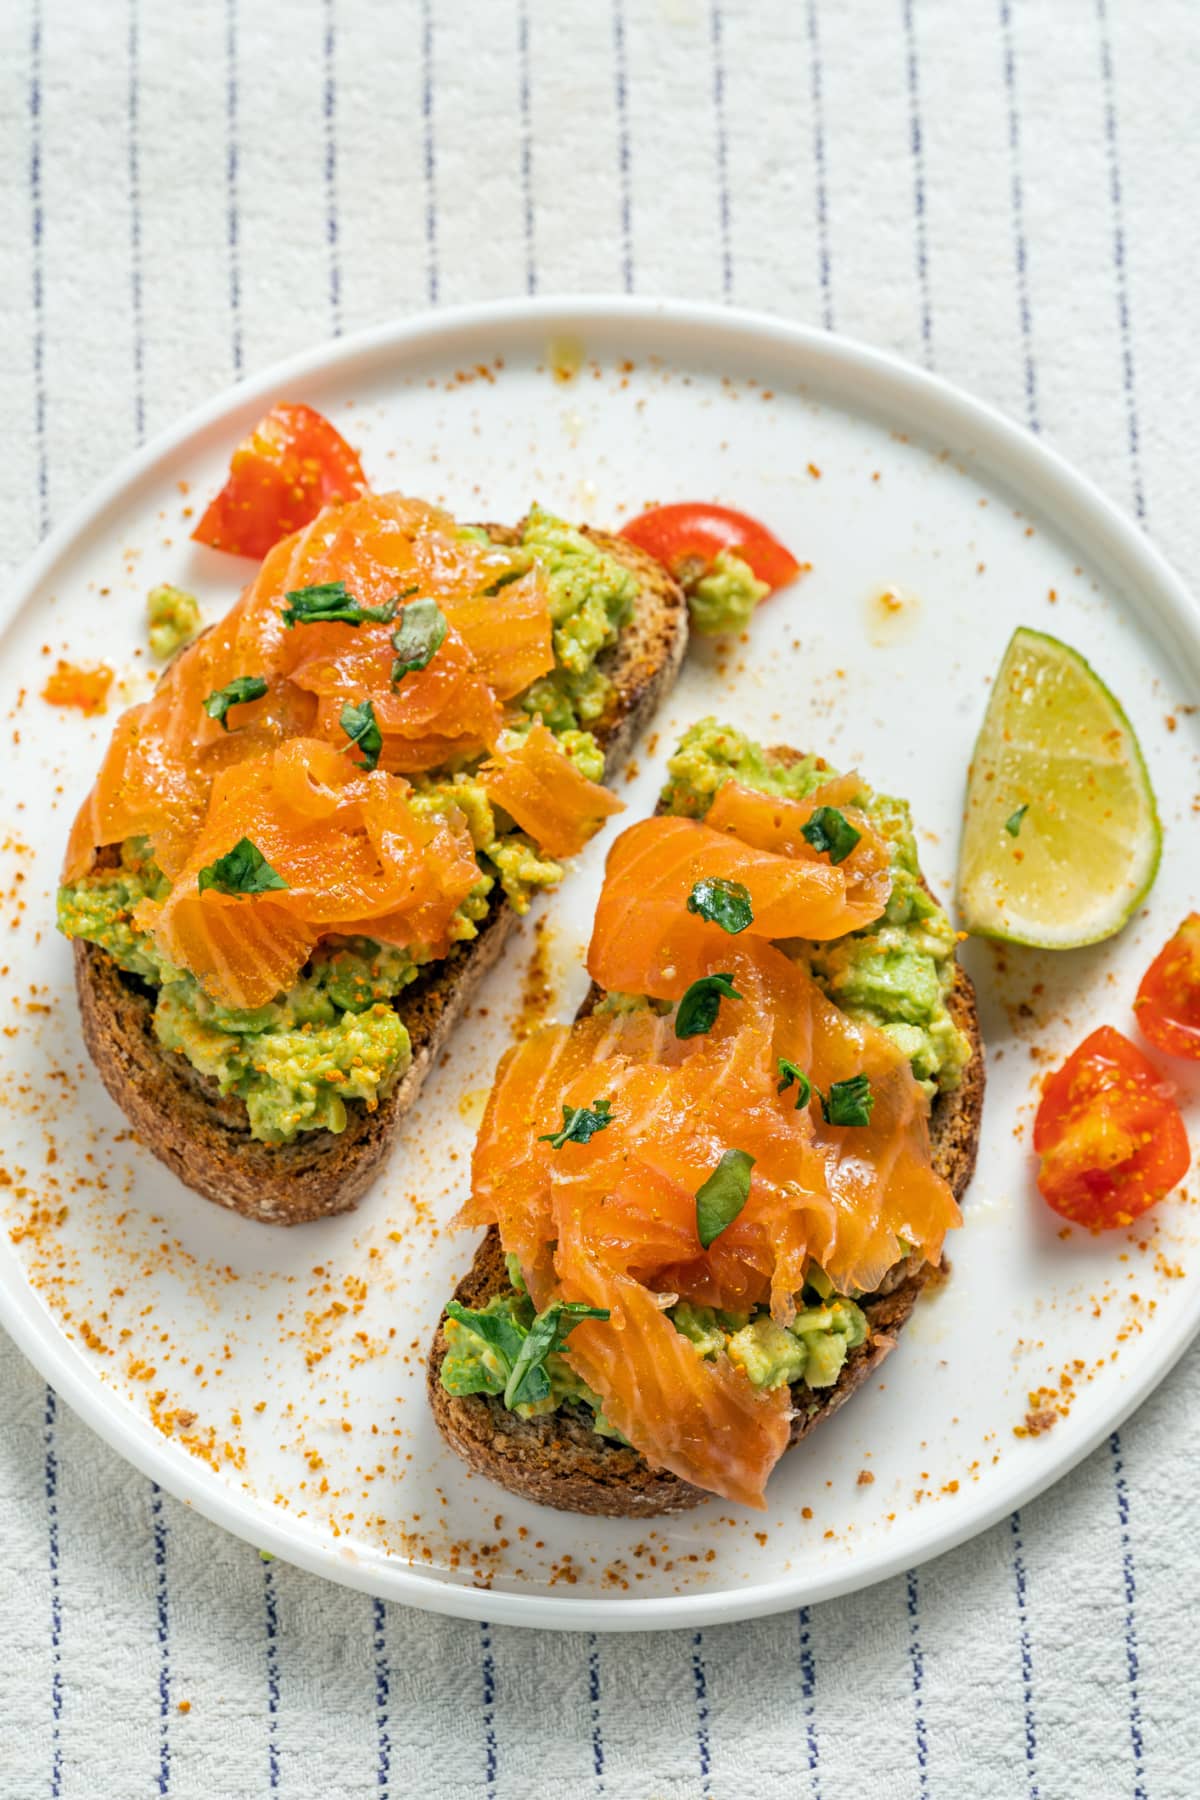 Breakfast bread with smoked salmon and avocado